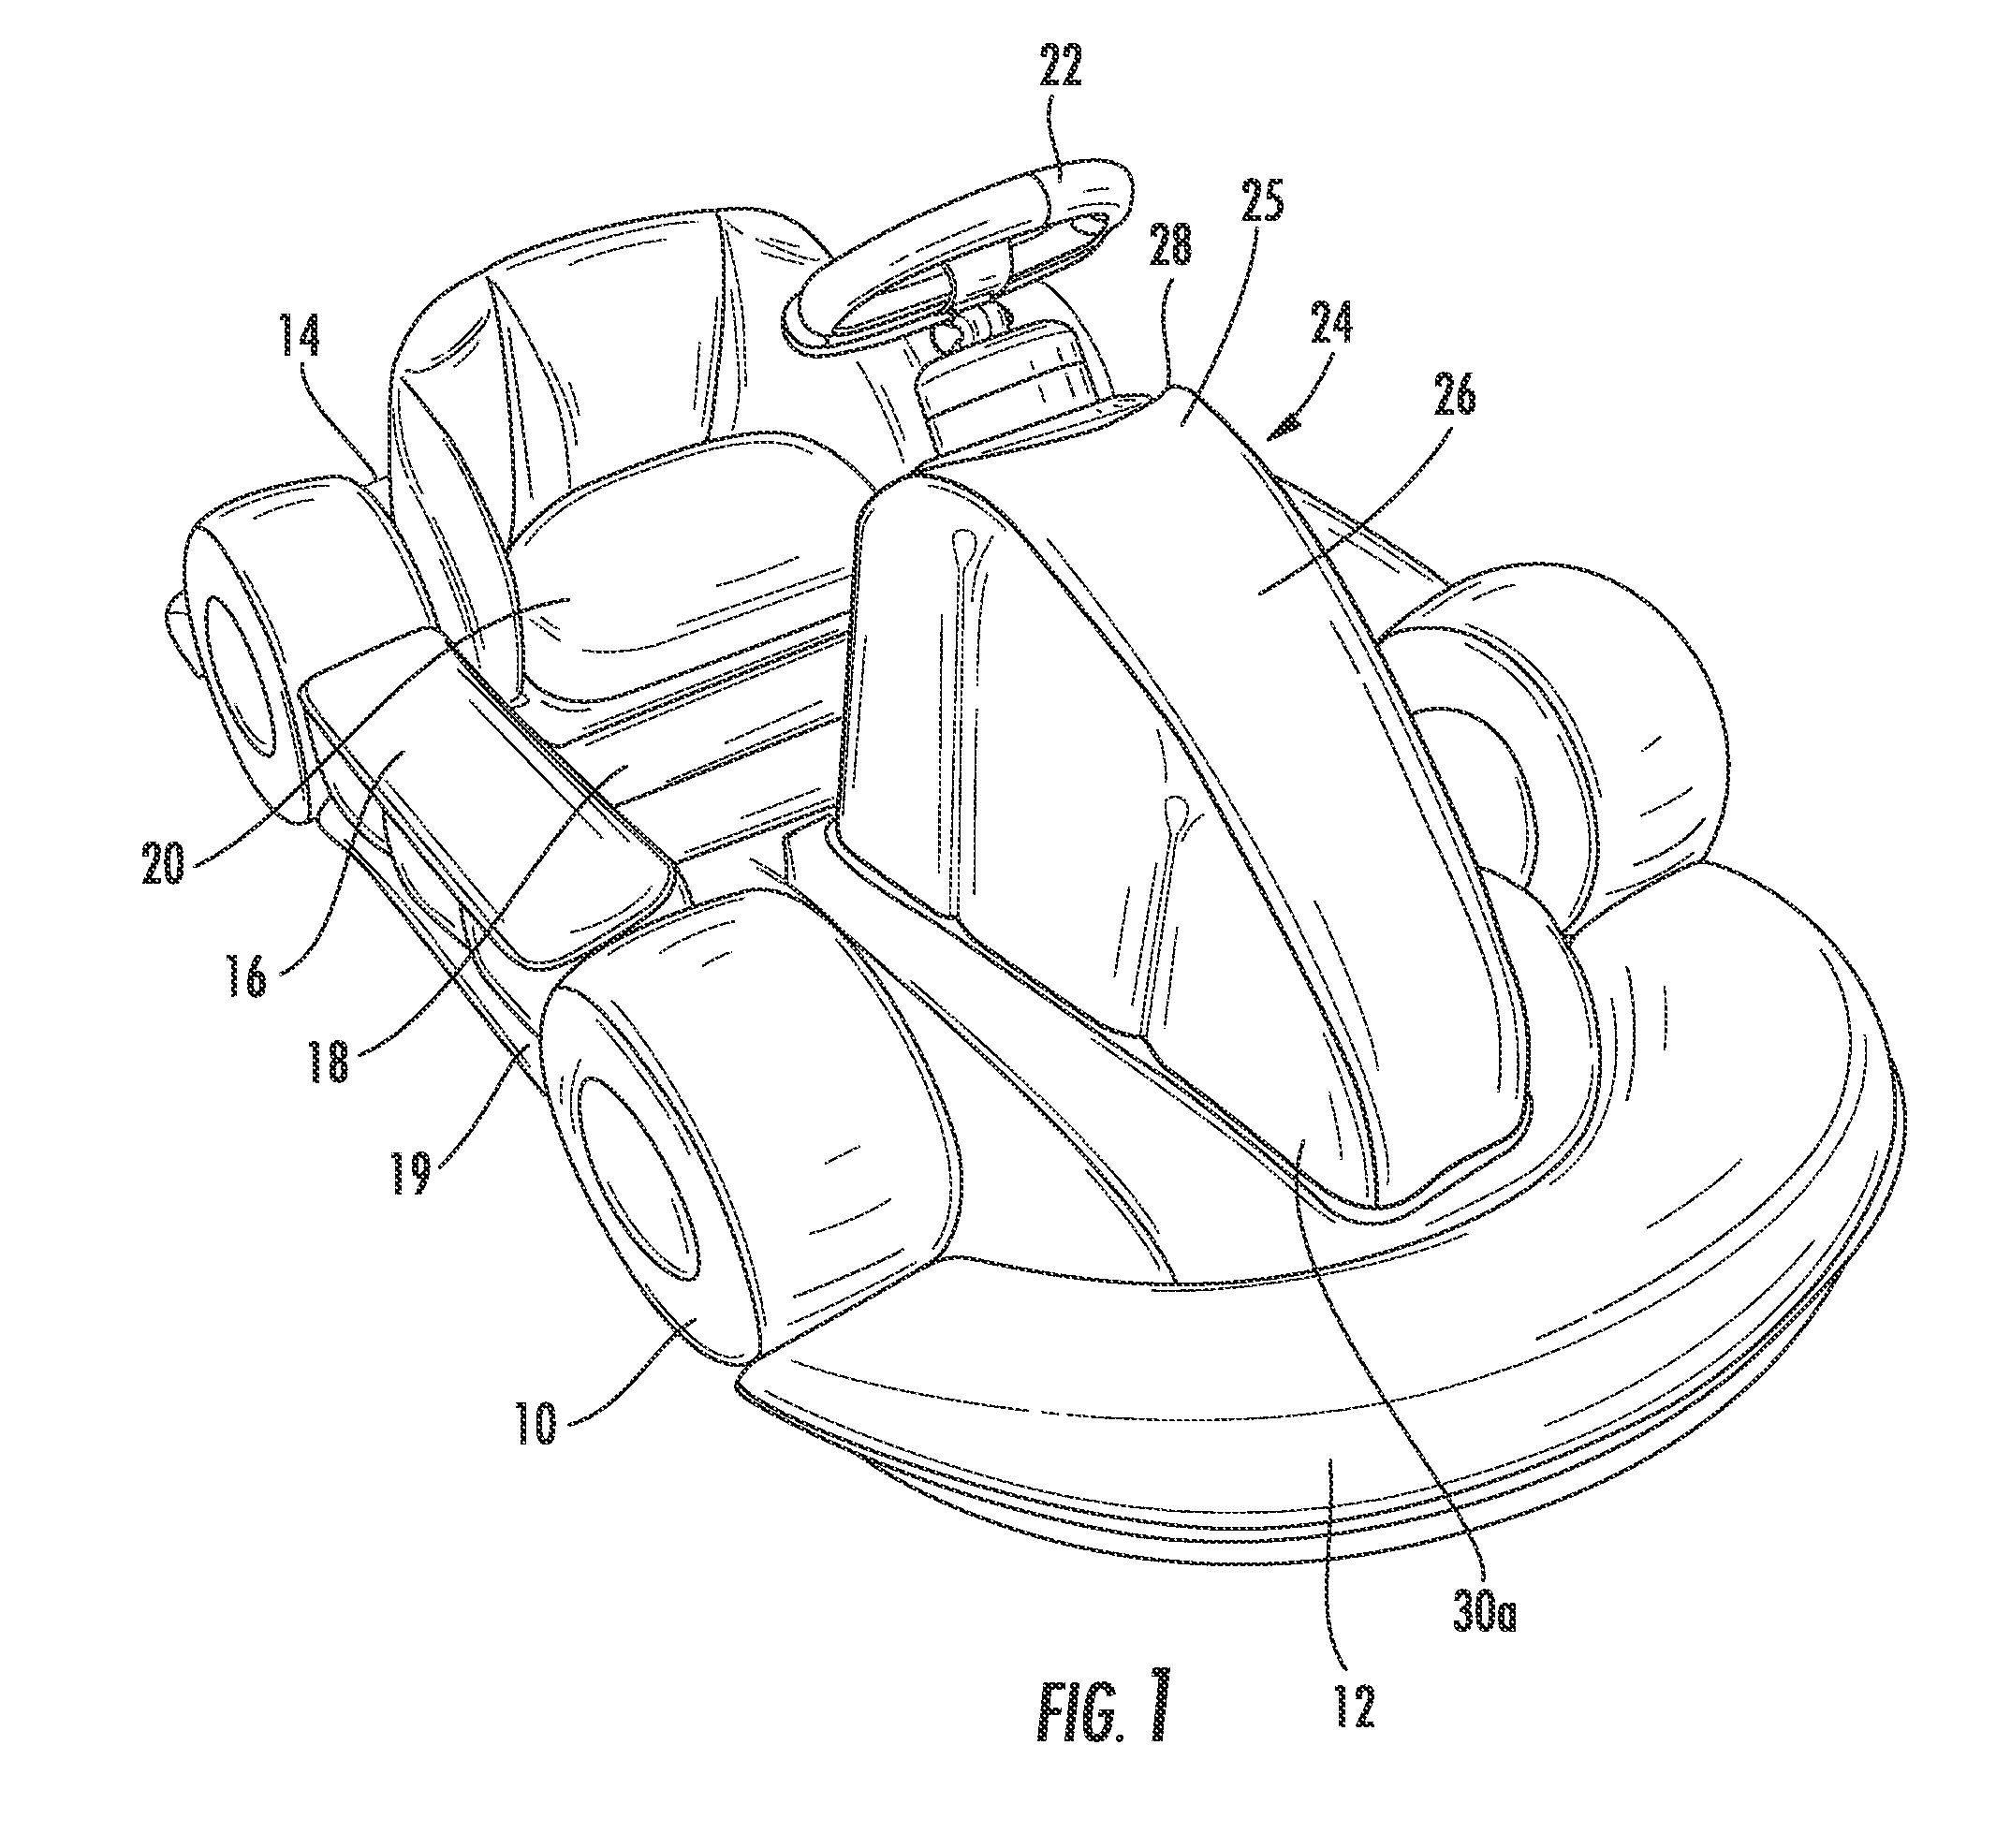 Inflatable vehicles for simulating driving for use with video games